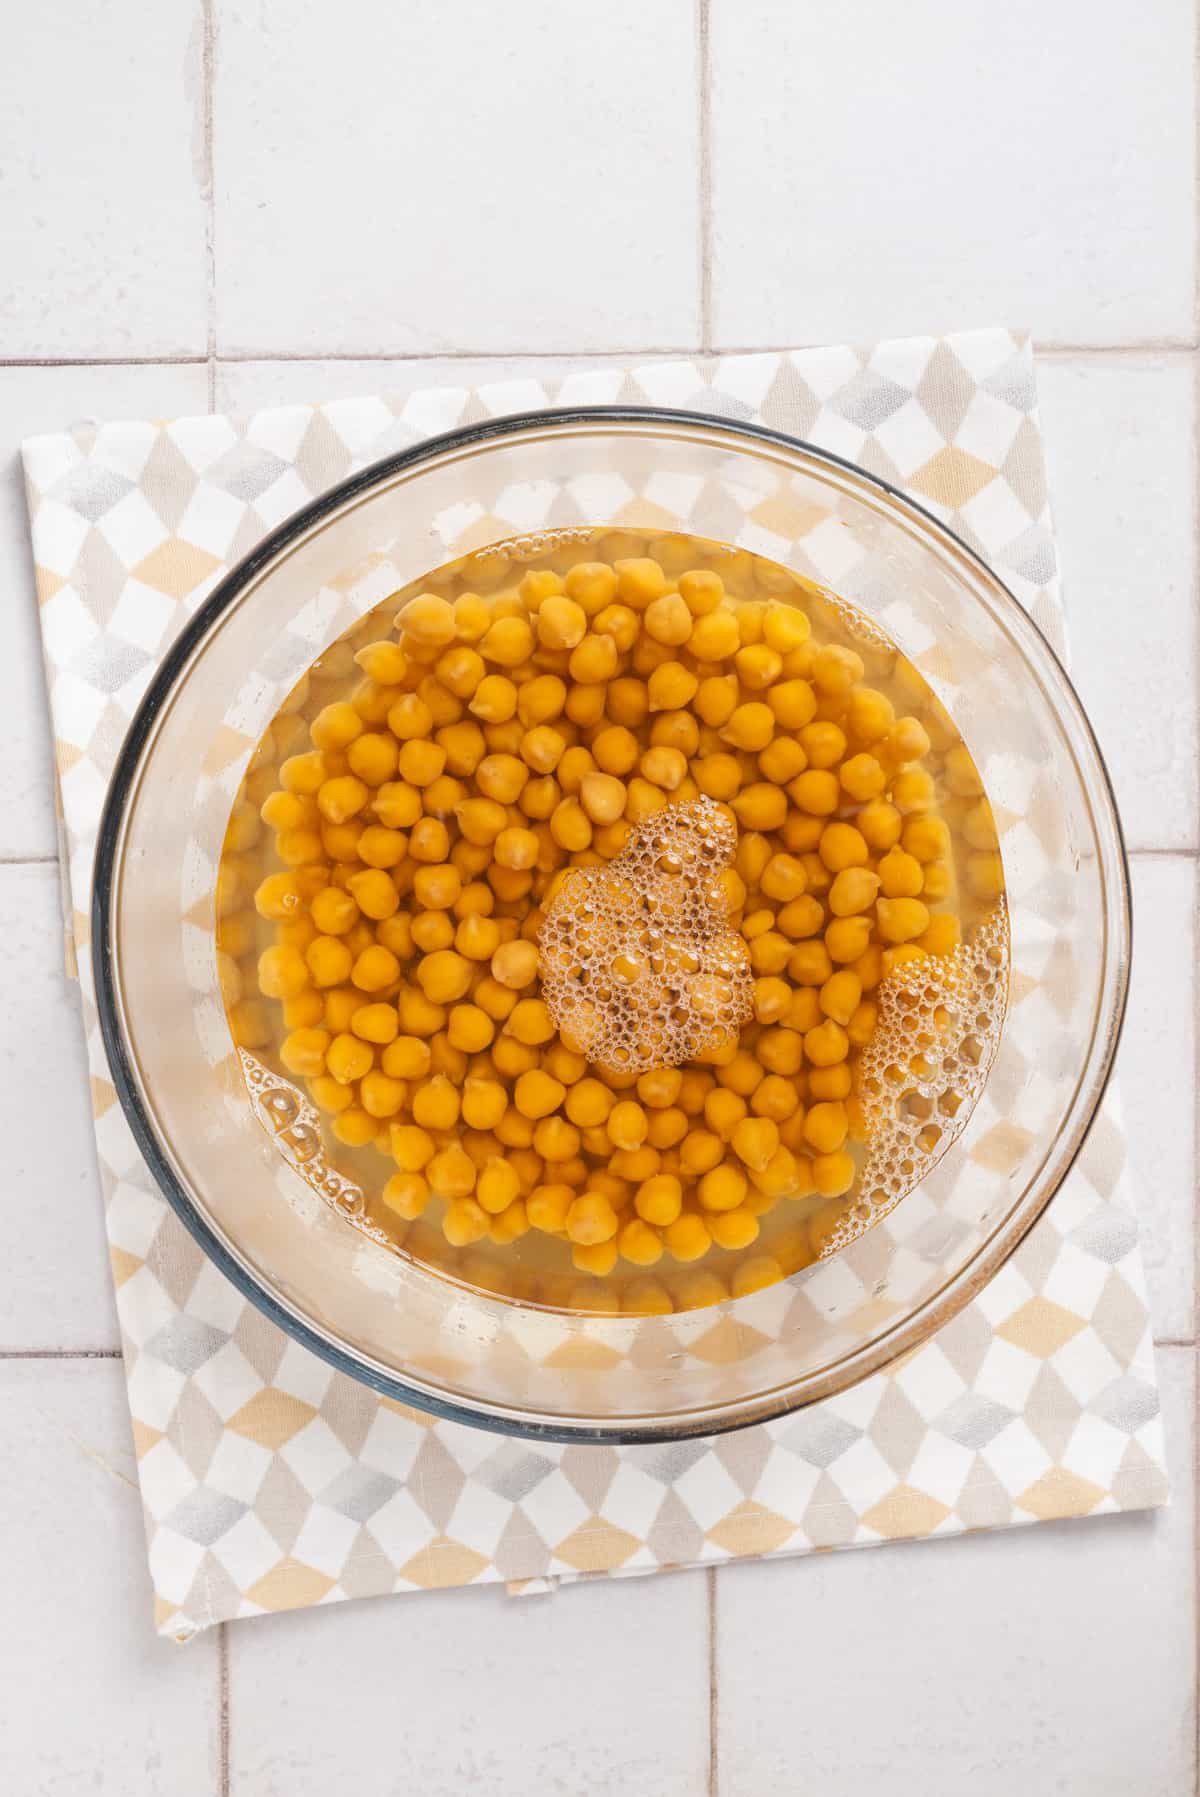 An image of chickpeas soaked in water in a clear bowl .